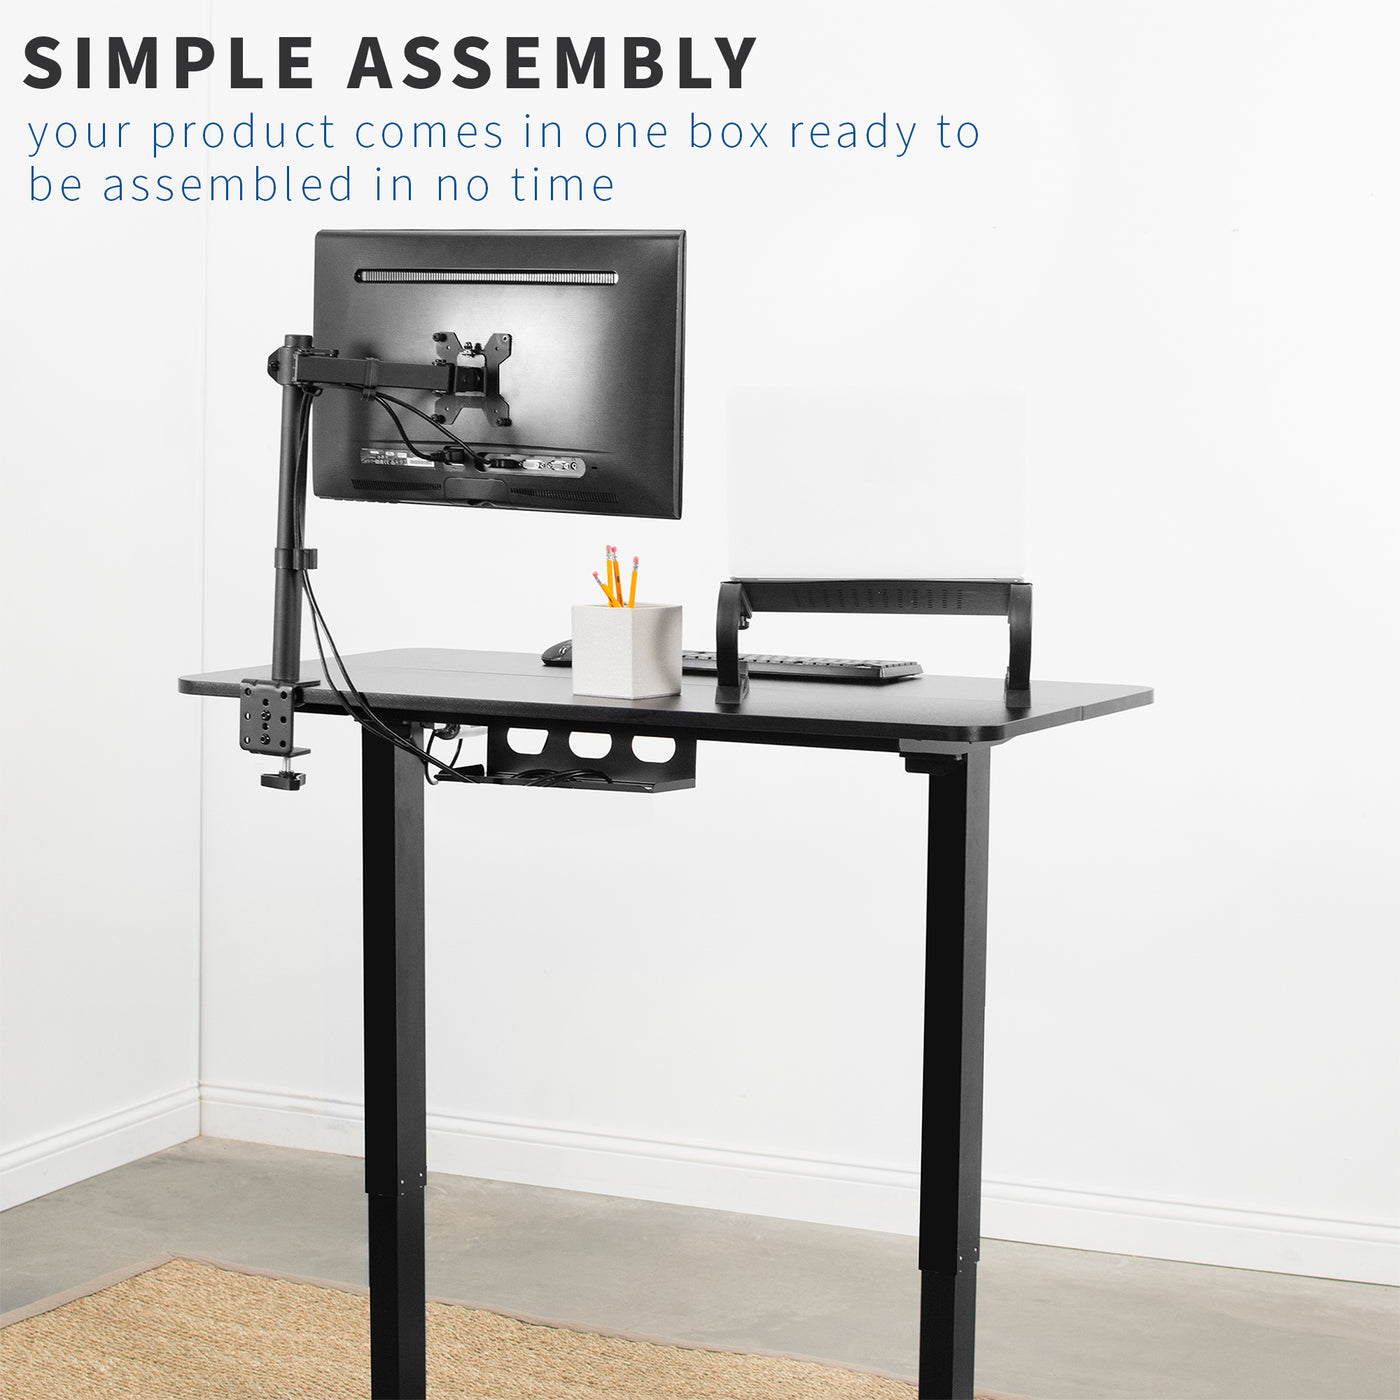 Simple assembly and the entire desk is shipped in one box.